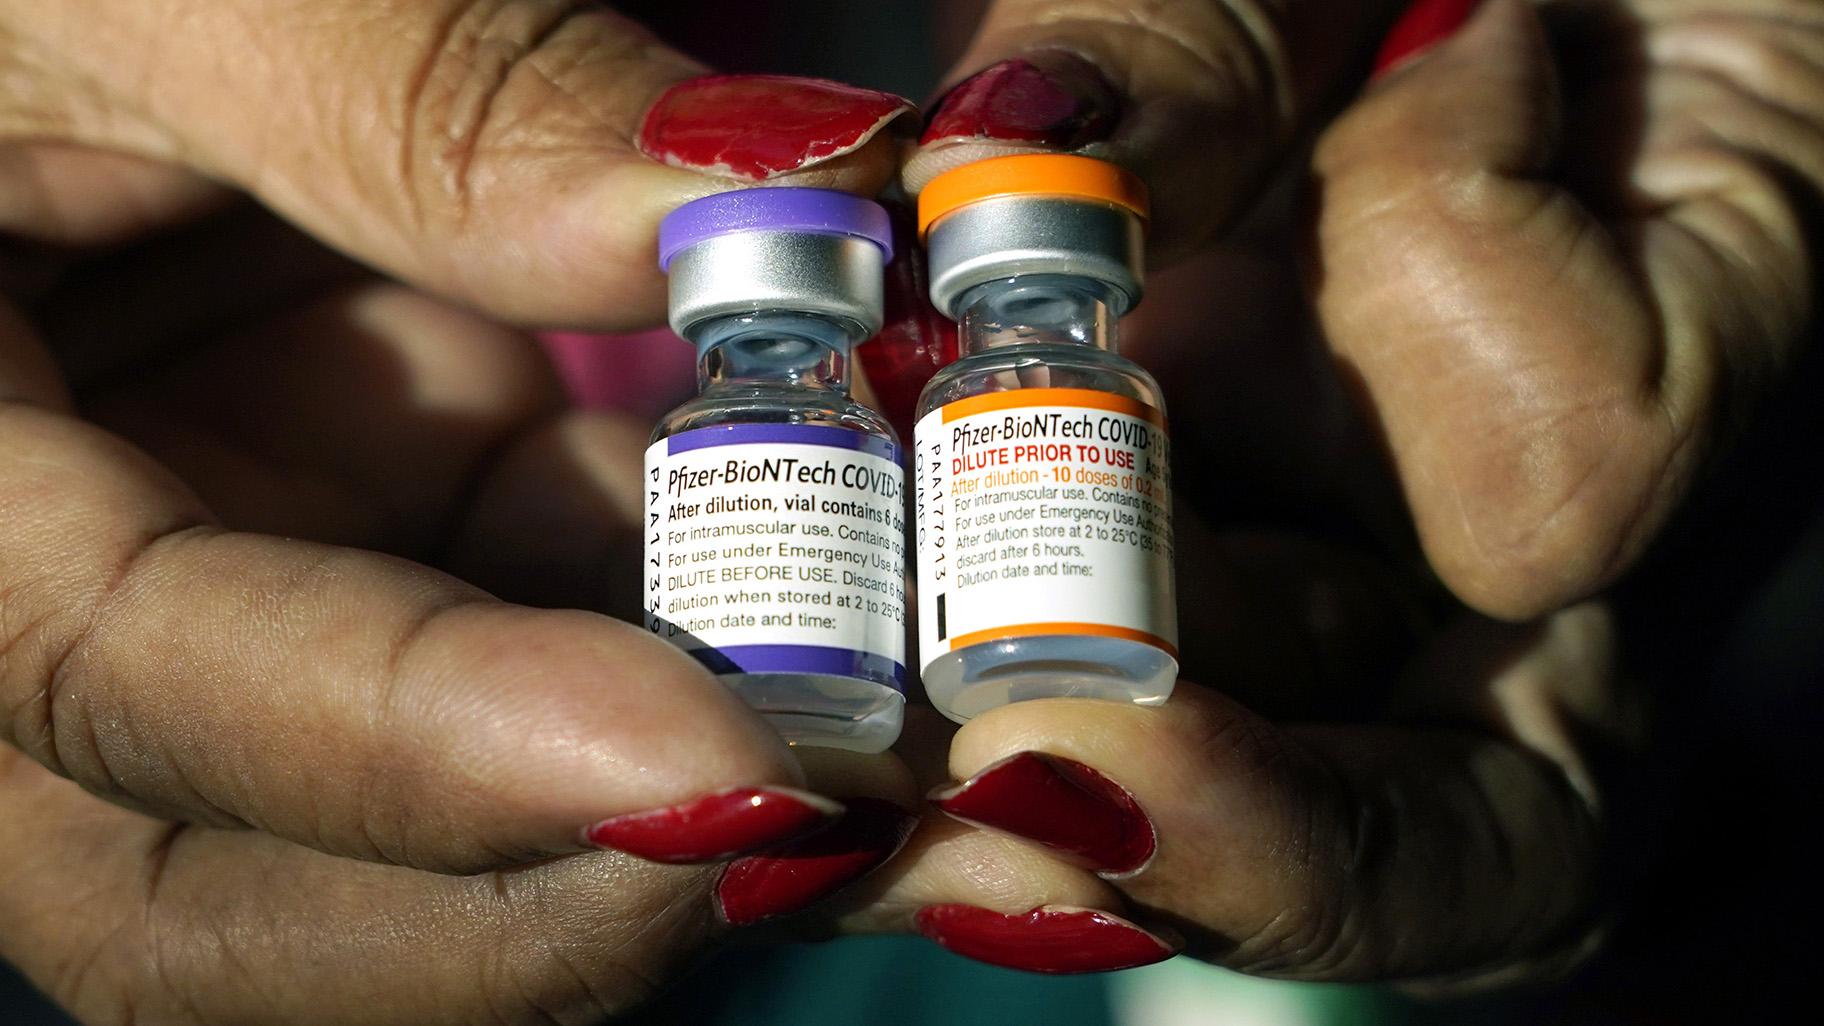 A nurse holds a vial of the Pfizer COVID-19 vaccine for children ages 5 to 11, right, and a vial of the vaccine for adults, which has a different colored label, at a vaccination station in Jackson, Miss., Tuesday, Feb. 8, 2022. (AP Photo / Rogelio V. Solis, File)